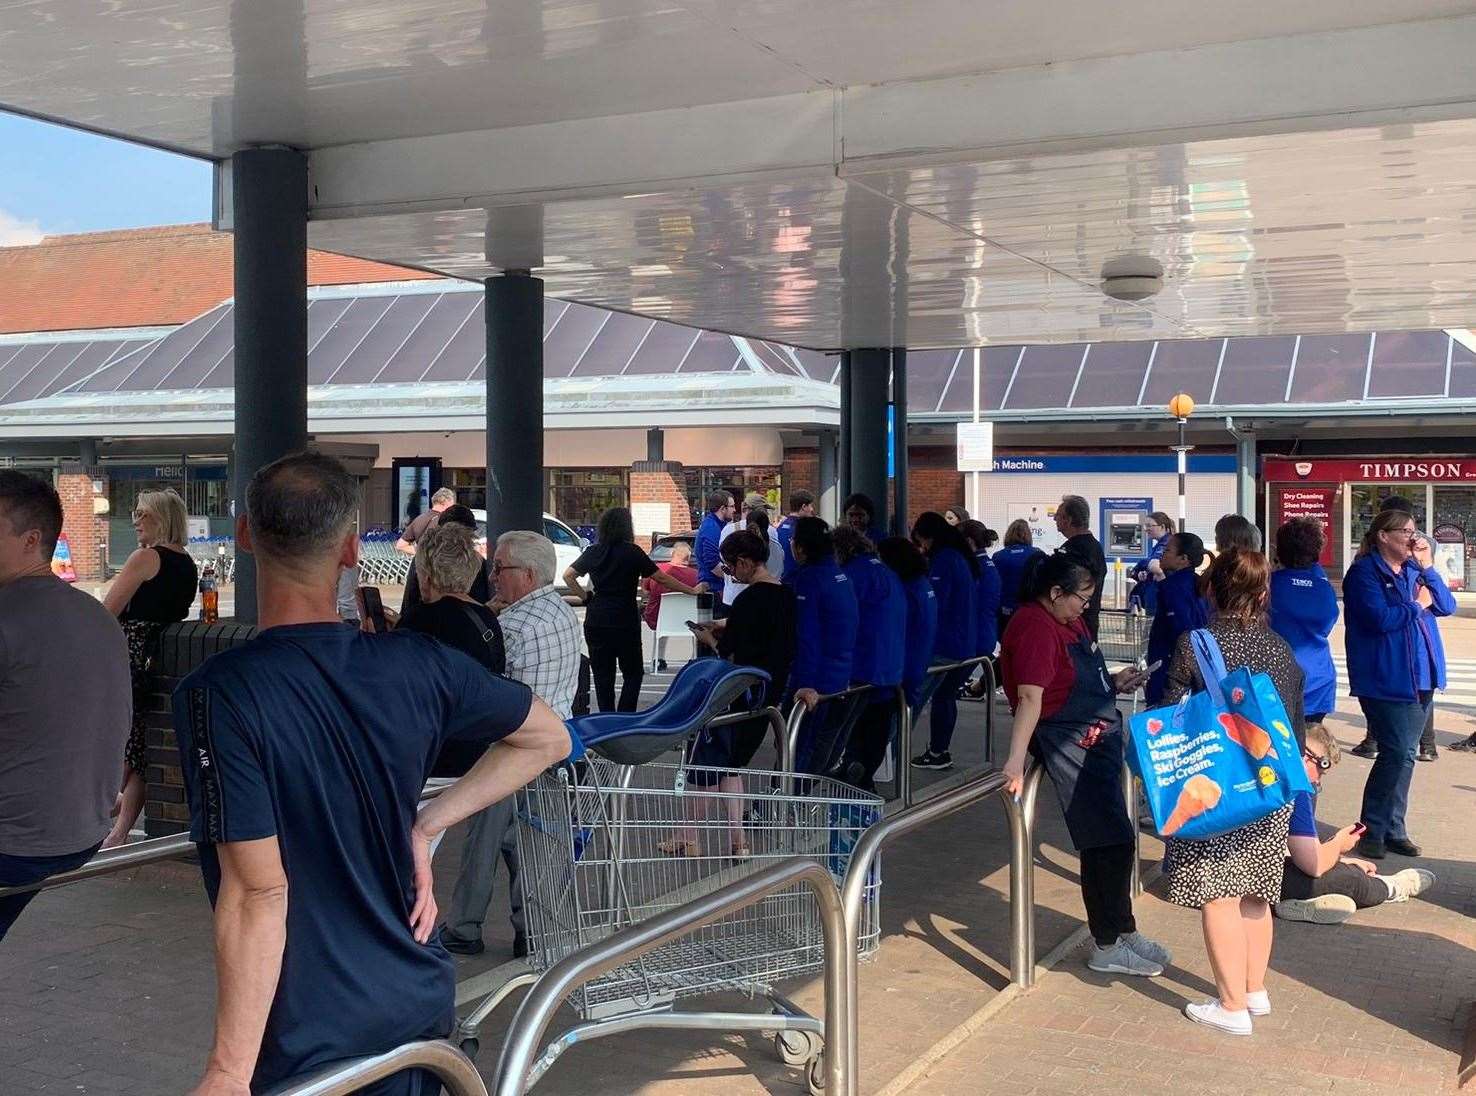 Shoppers and staff at Tesco Crooksfoot in Willesborough, Ashford have been evacuated.